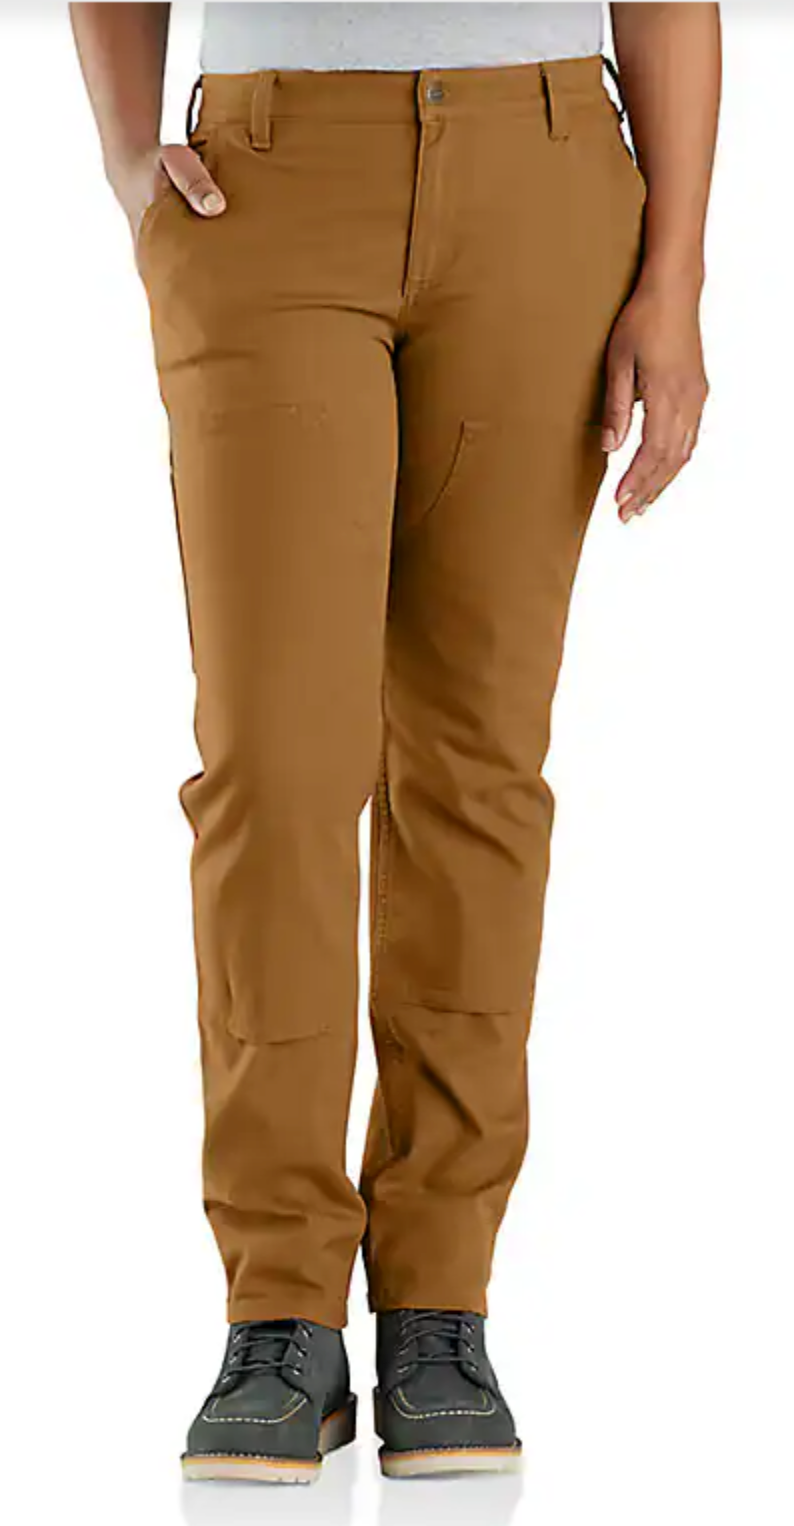 Carhartt Phase 2: Womens Waist Sized Pants with Length